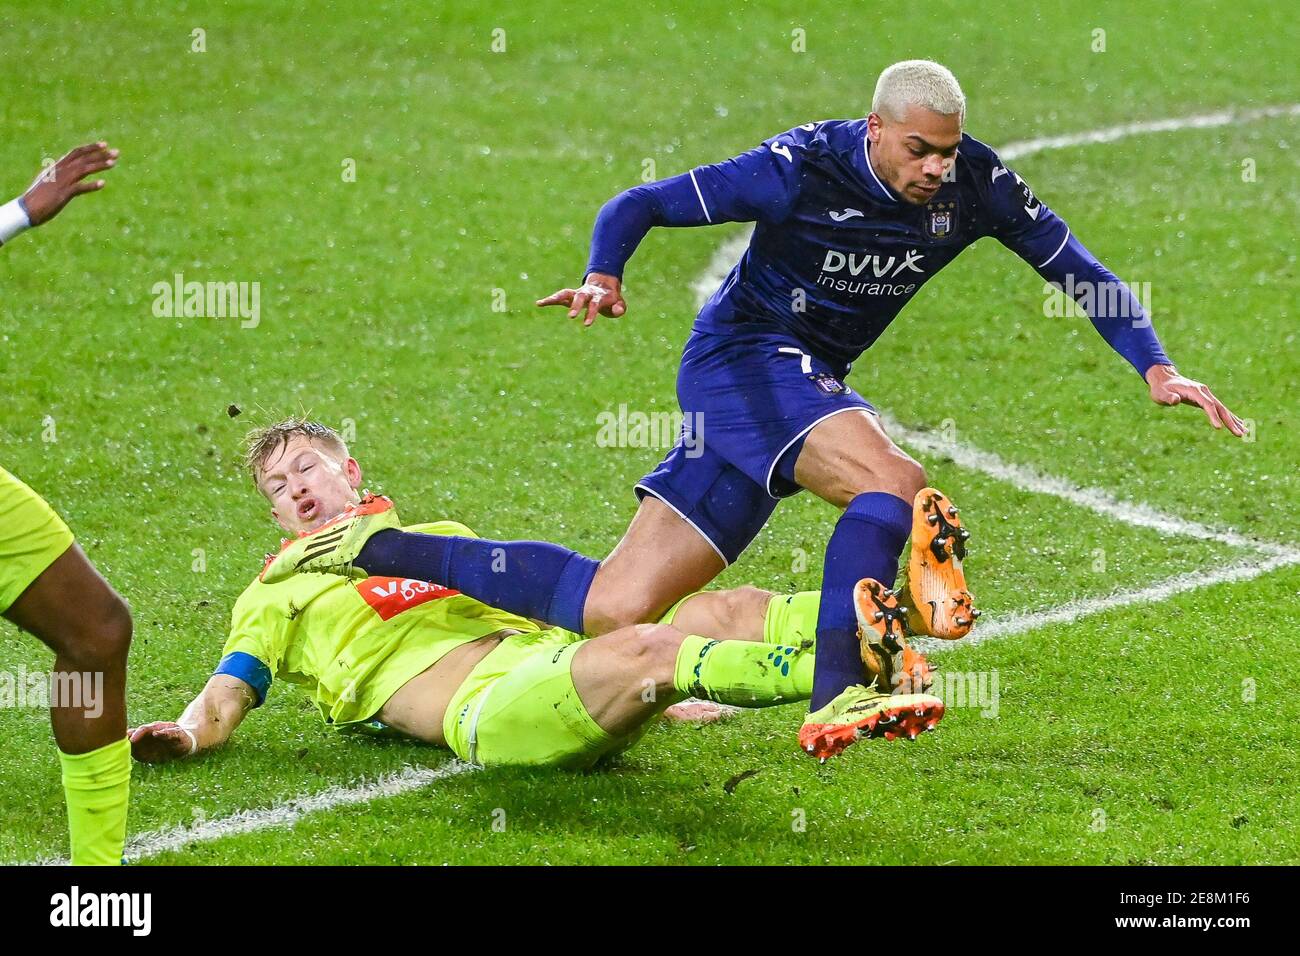 Anderlecht's Lukas Nmecha and Gent's Andreas Hanche Olsen fight for the ball during a soccer match between RSCA Anderlecht and KAA Gent, Sunday 31 Jan Stock Photo